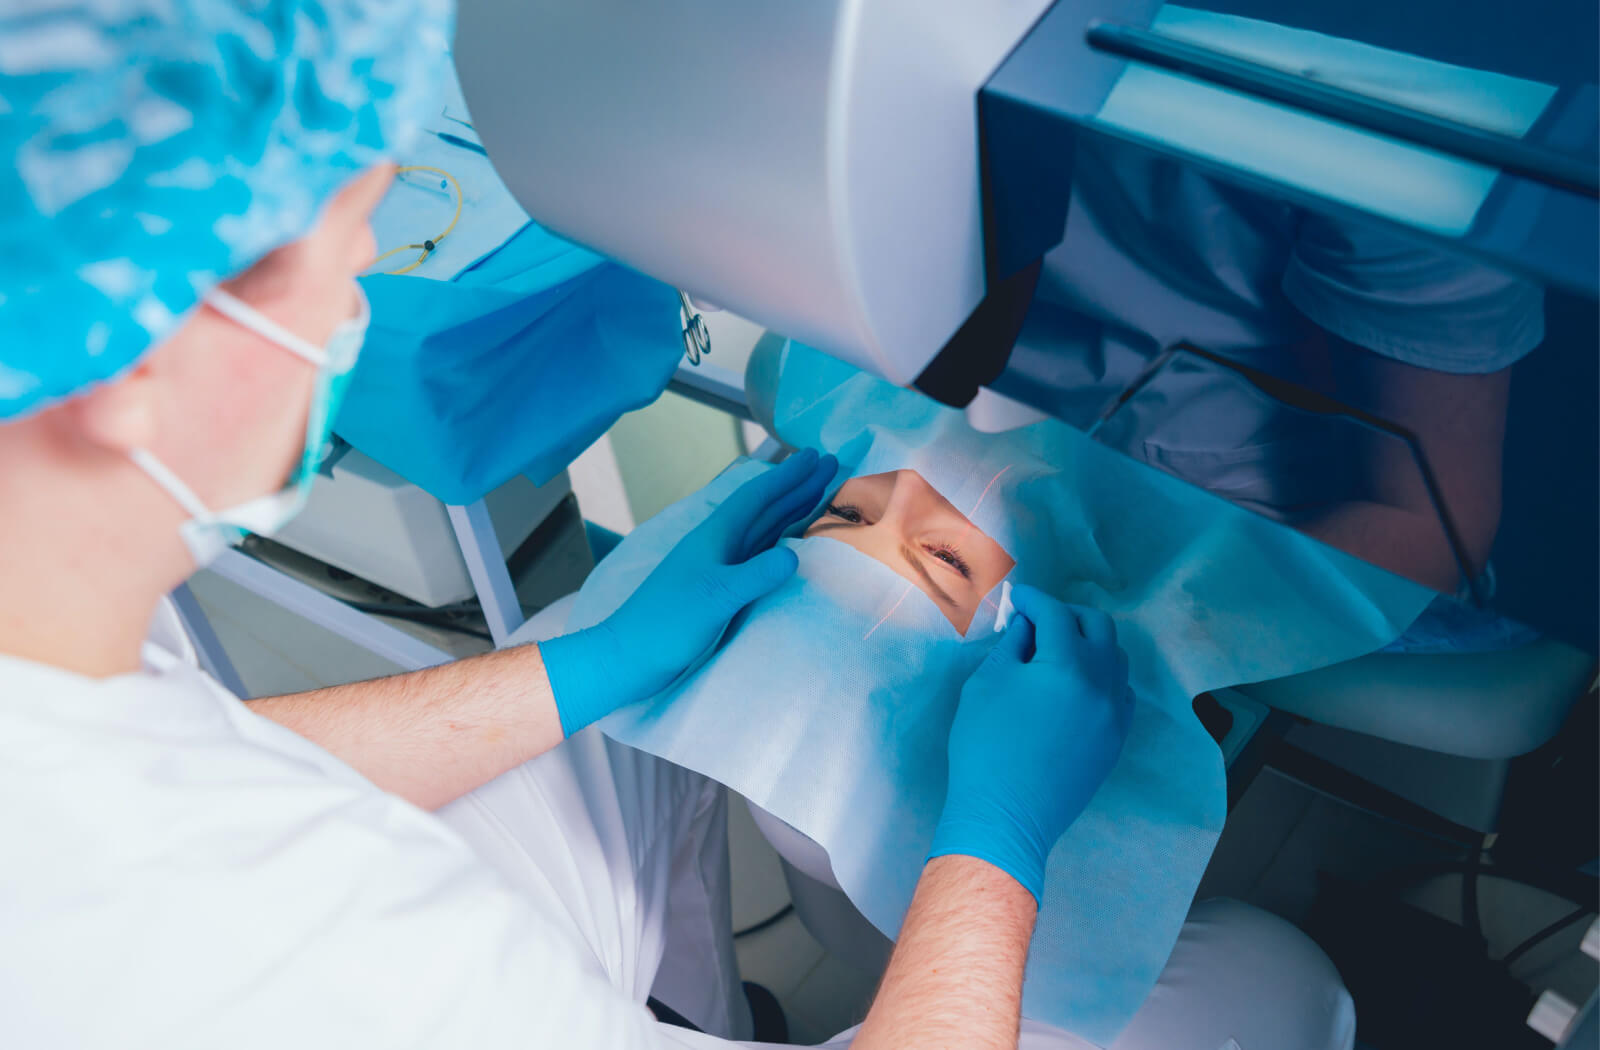 A patient lying in an operating room and a surgeon performing a LASIK surgery.